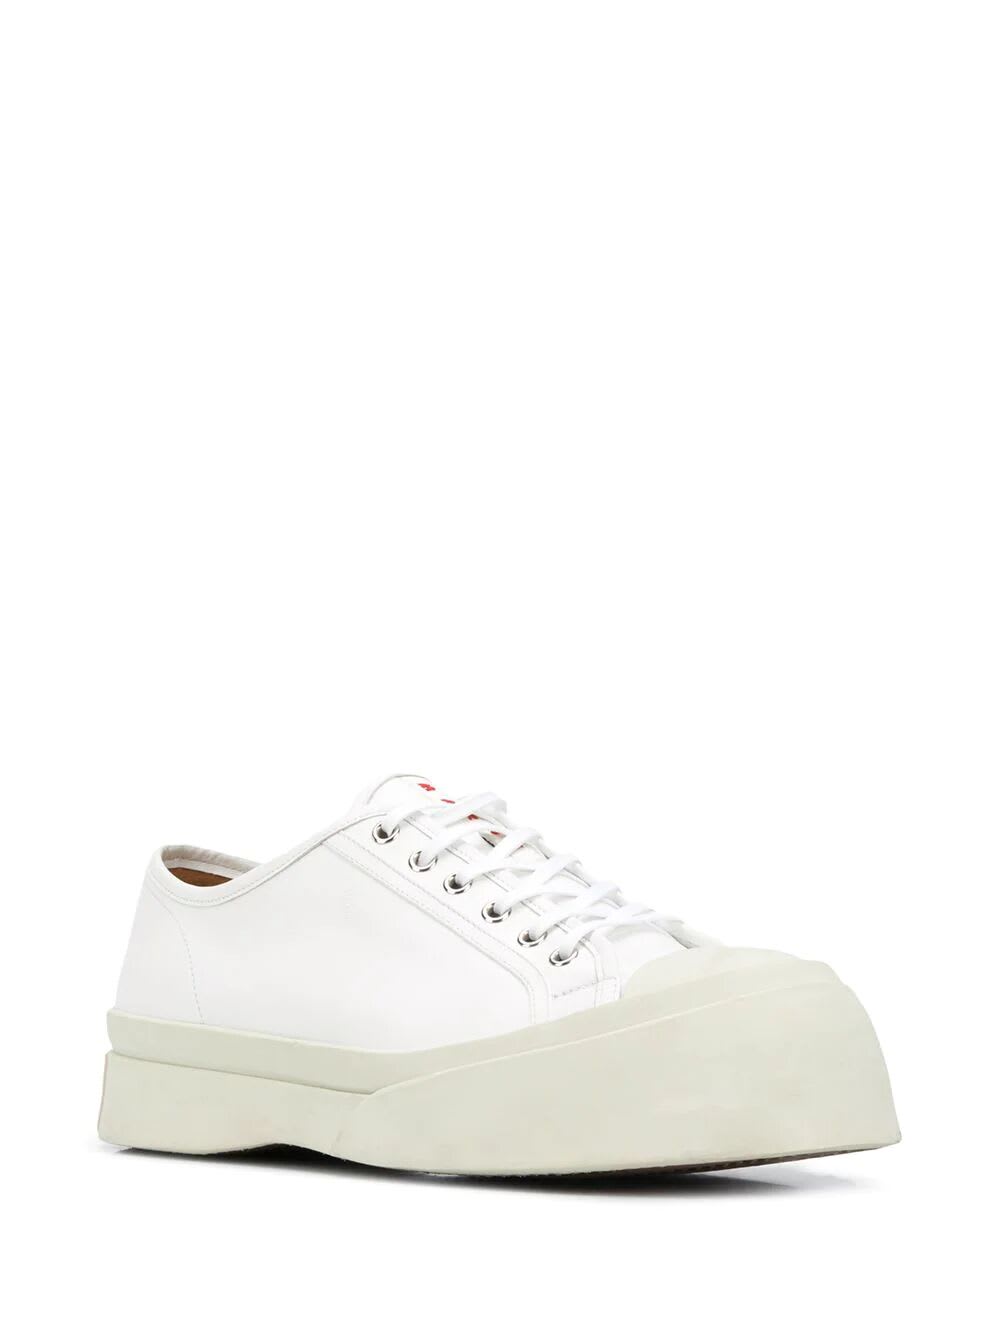 Shop Marni Lace Up Sneakers In Lily White